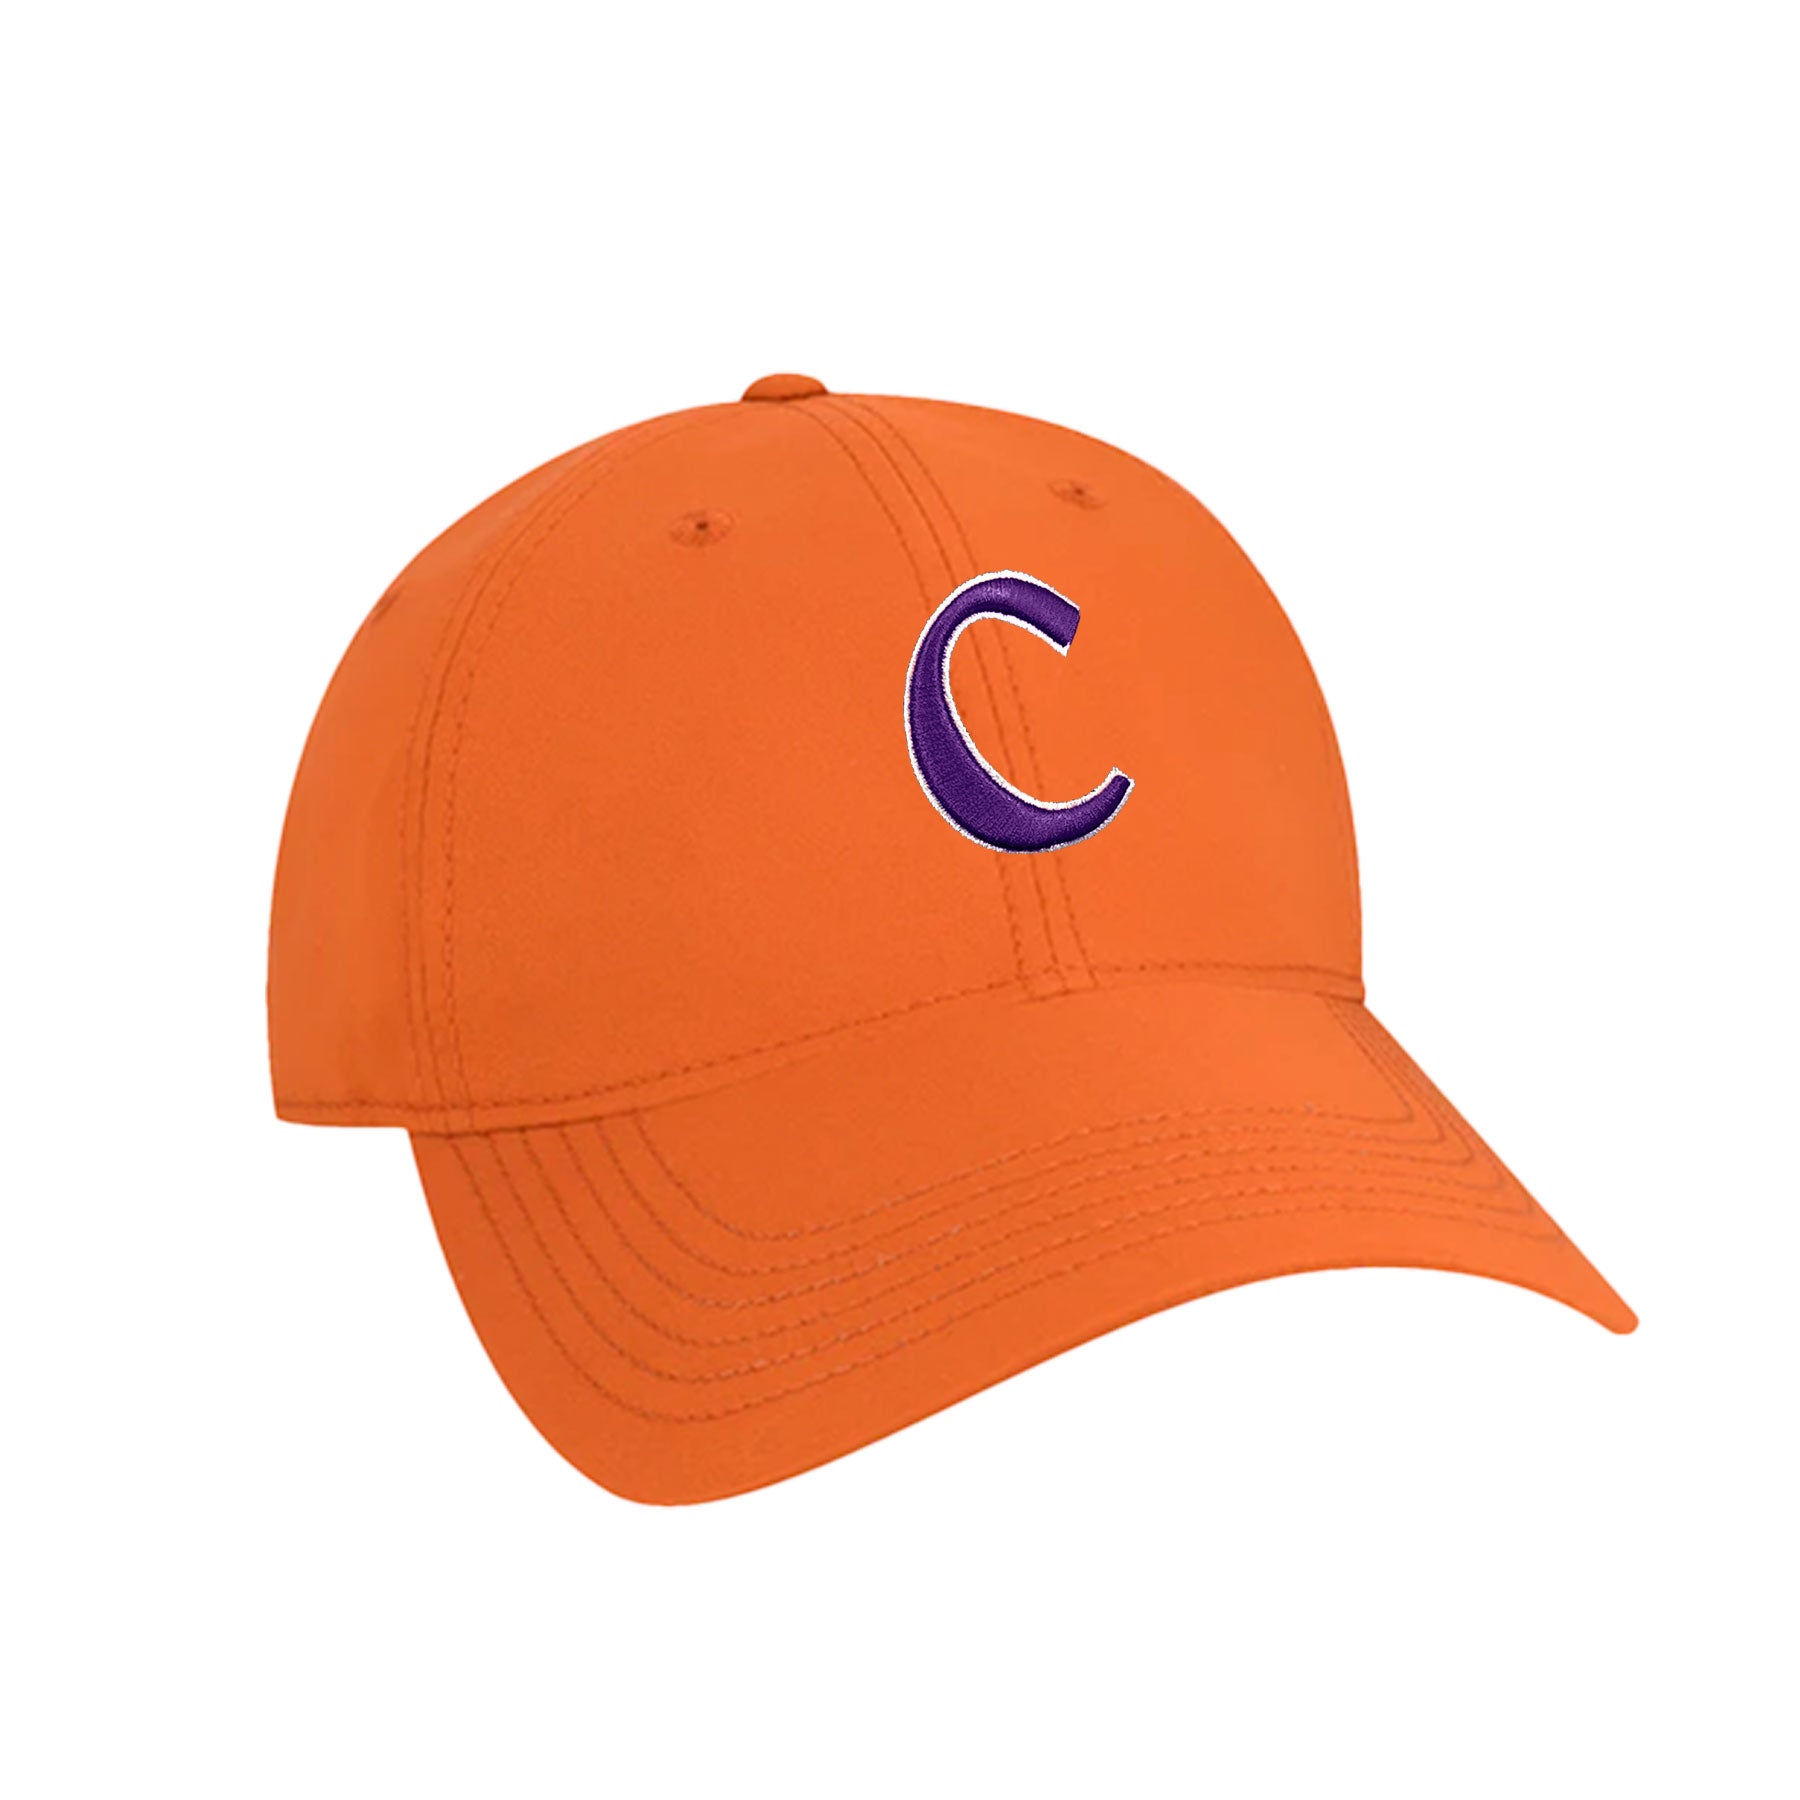 C Cocky Hand Adjustable Cap - Barefoot Campus Outfitter